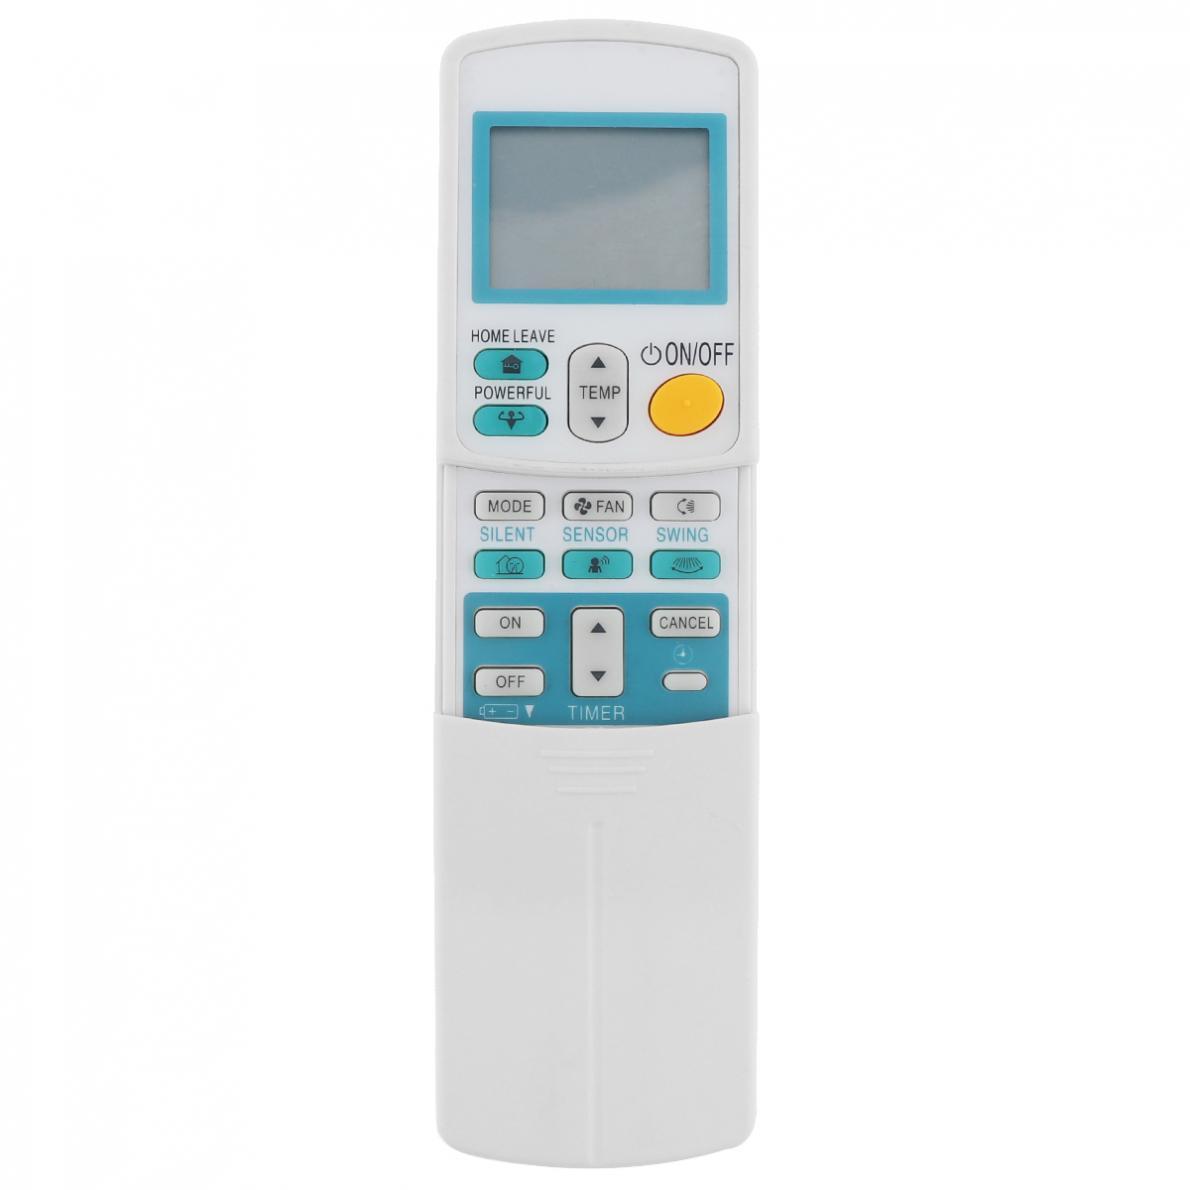 

Kelang Universal LCD Air Conditioner IR Remote Control for DAIKIN Air Condition 433A1 433A75